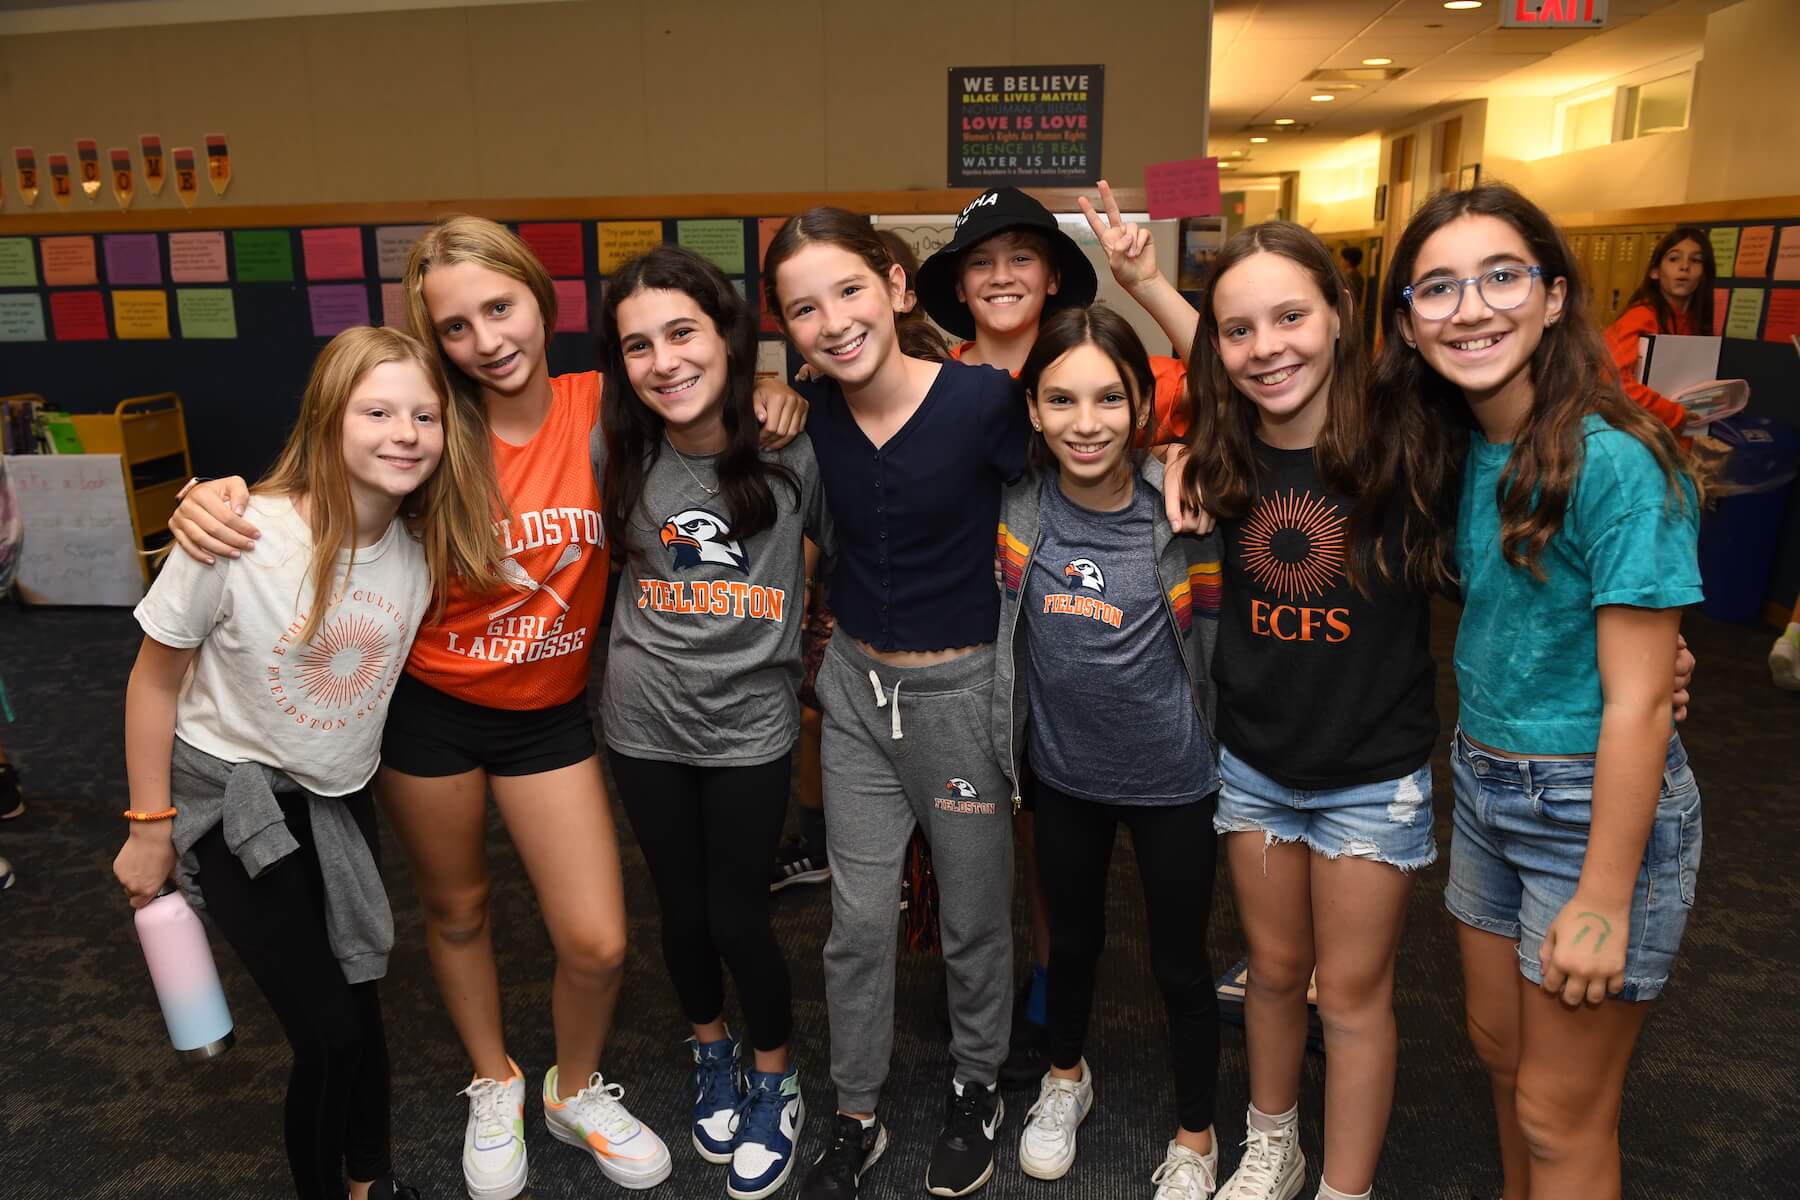 Ethical Culture Fieldston School Middle School students gather in a common area for a photo